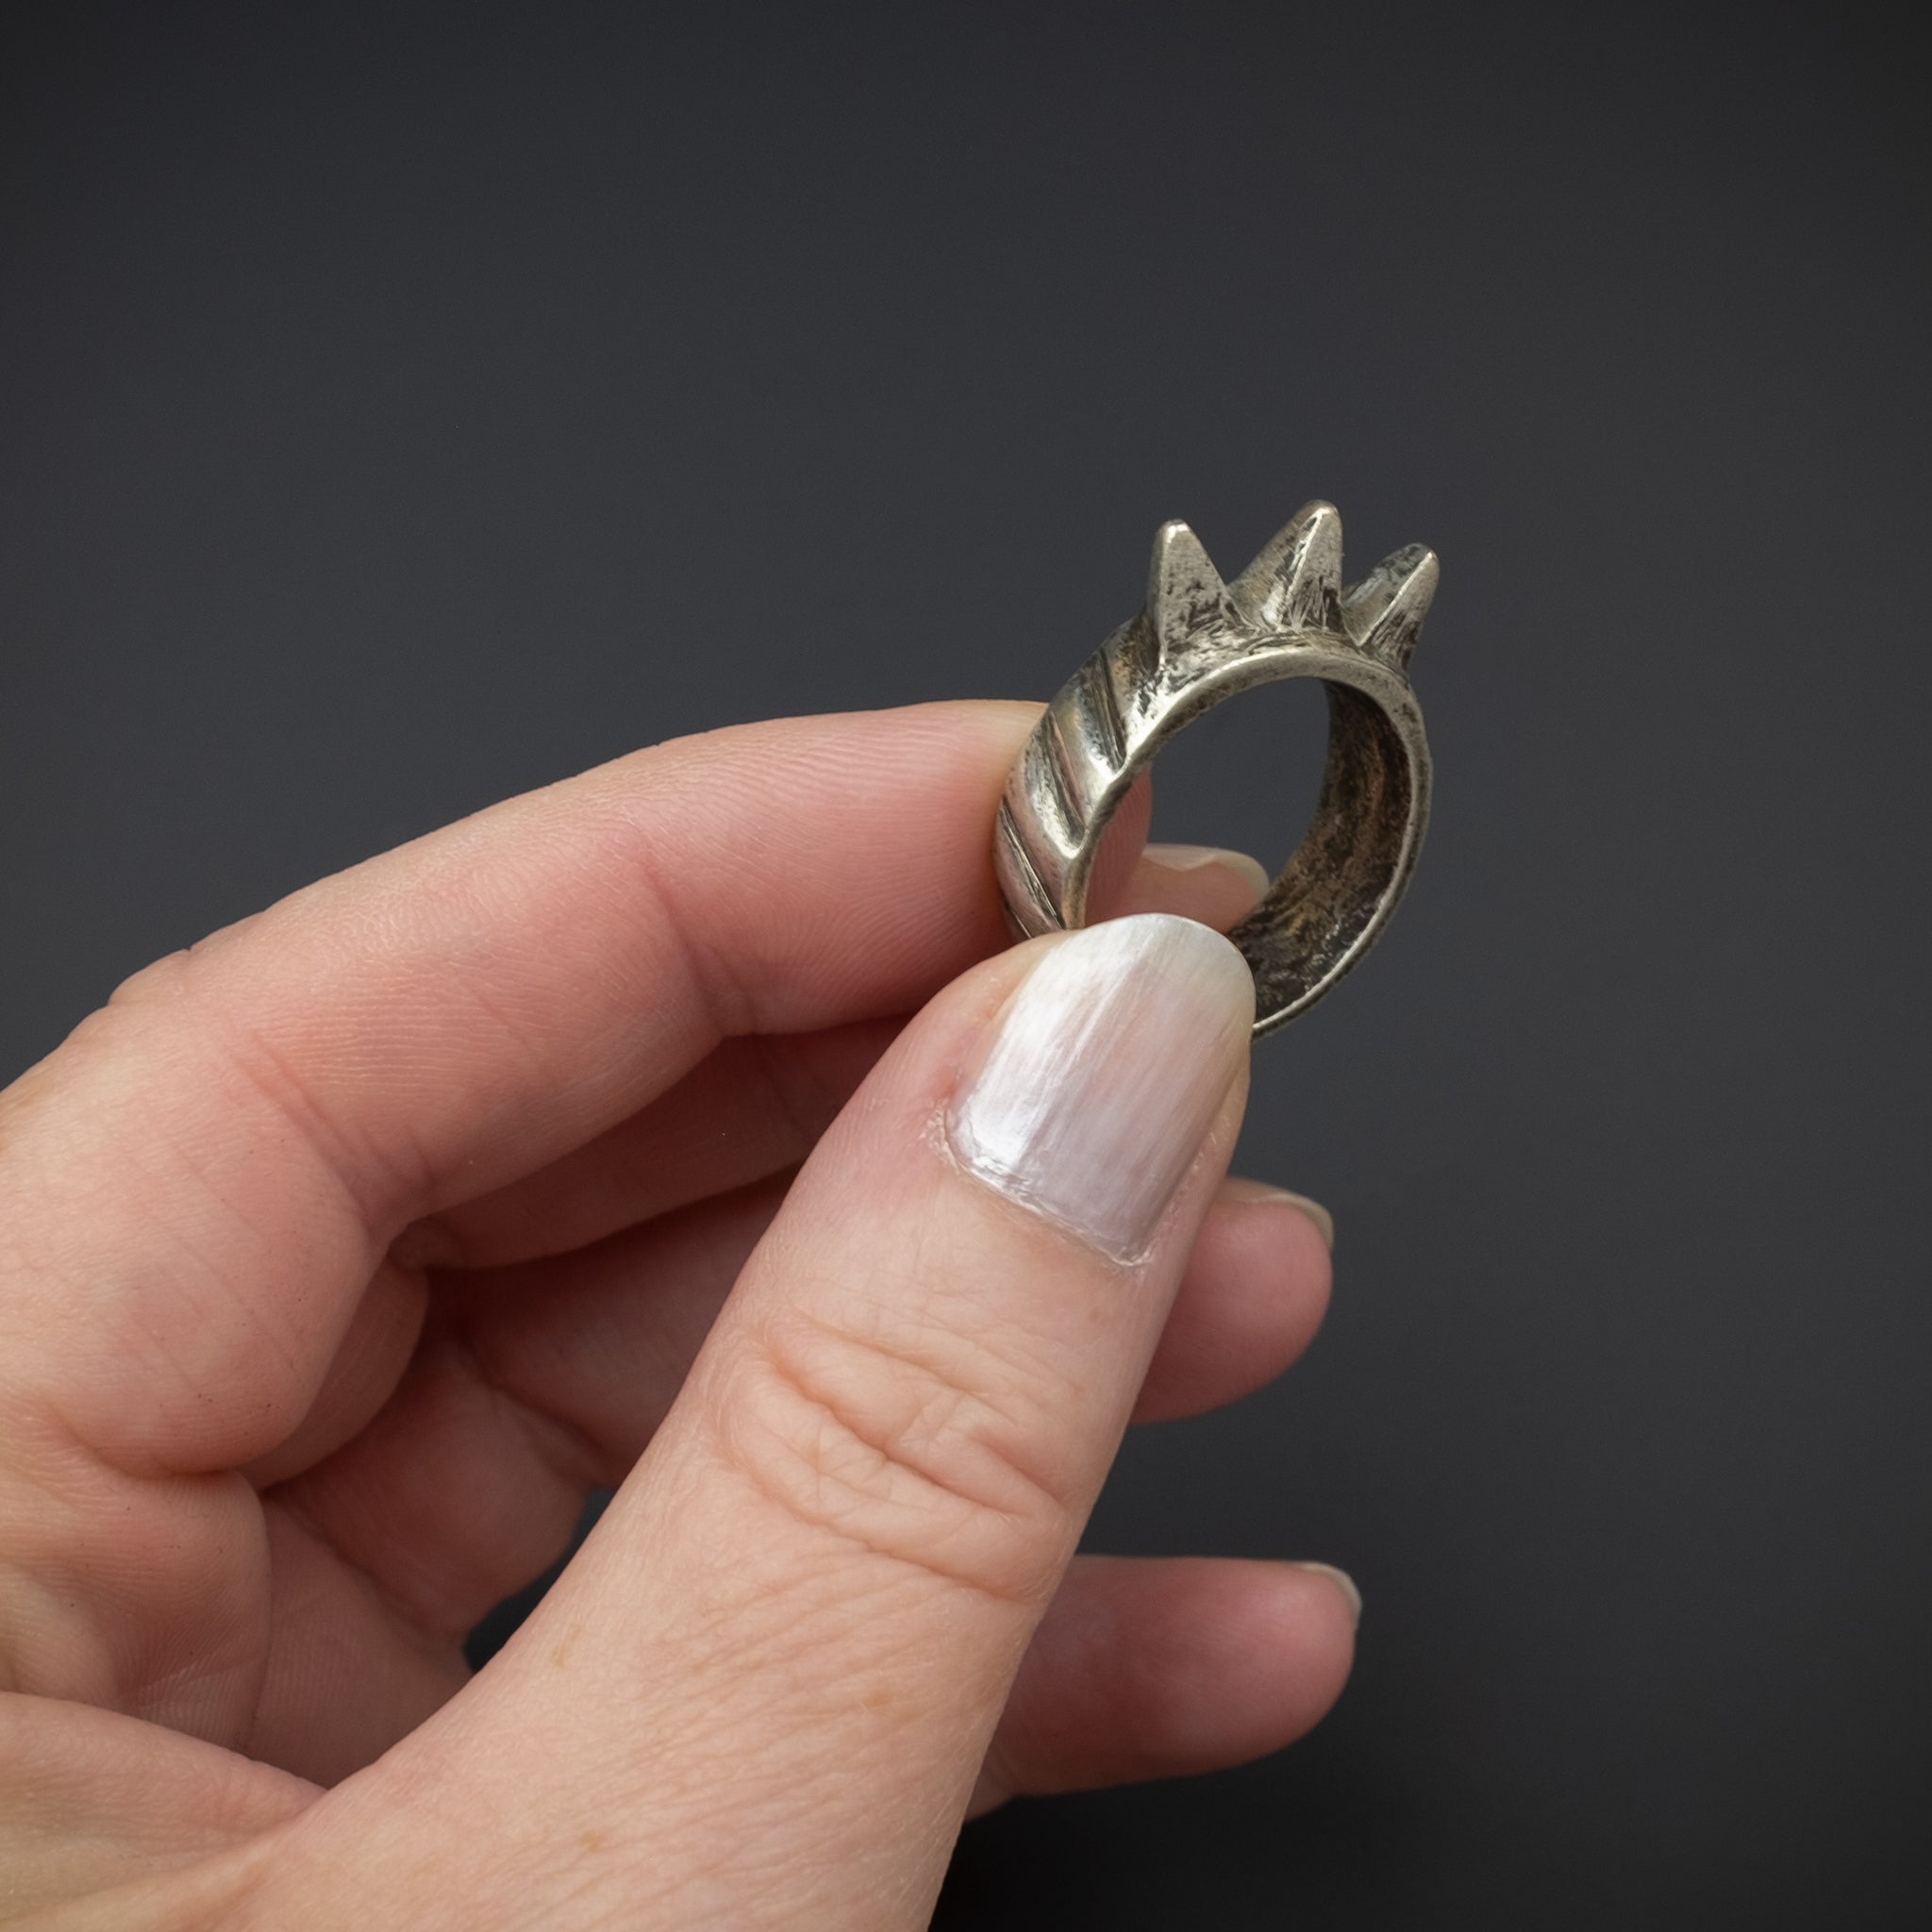 Vintage Silver ‘Crown’ Ring, Rissani, Morocco